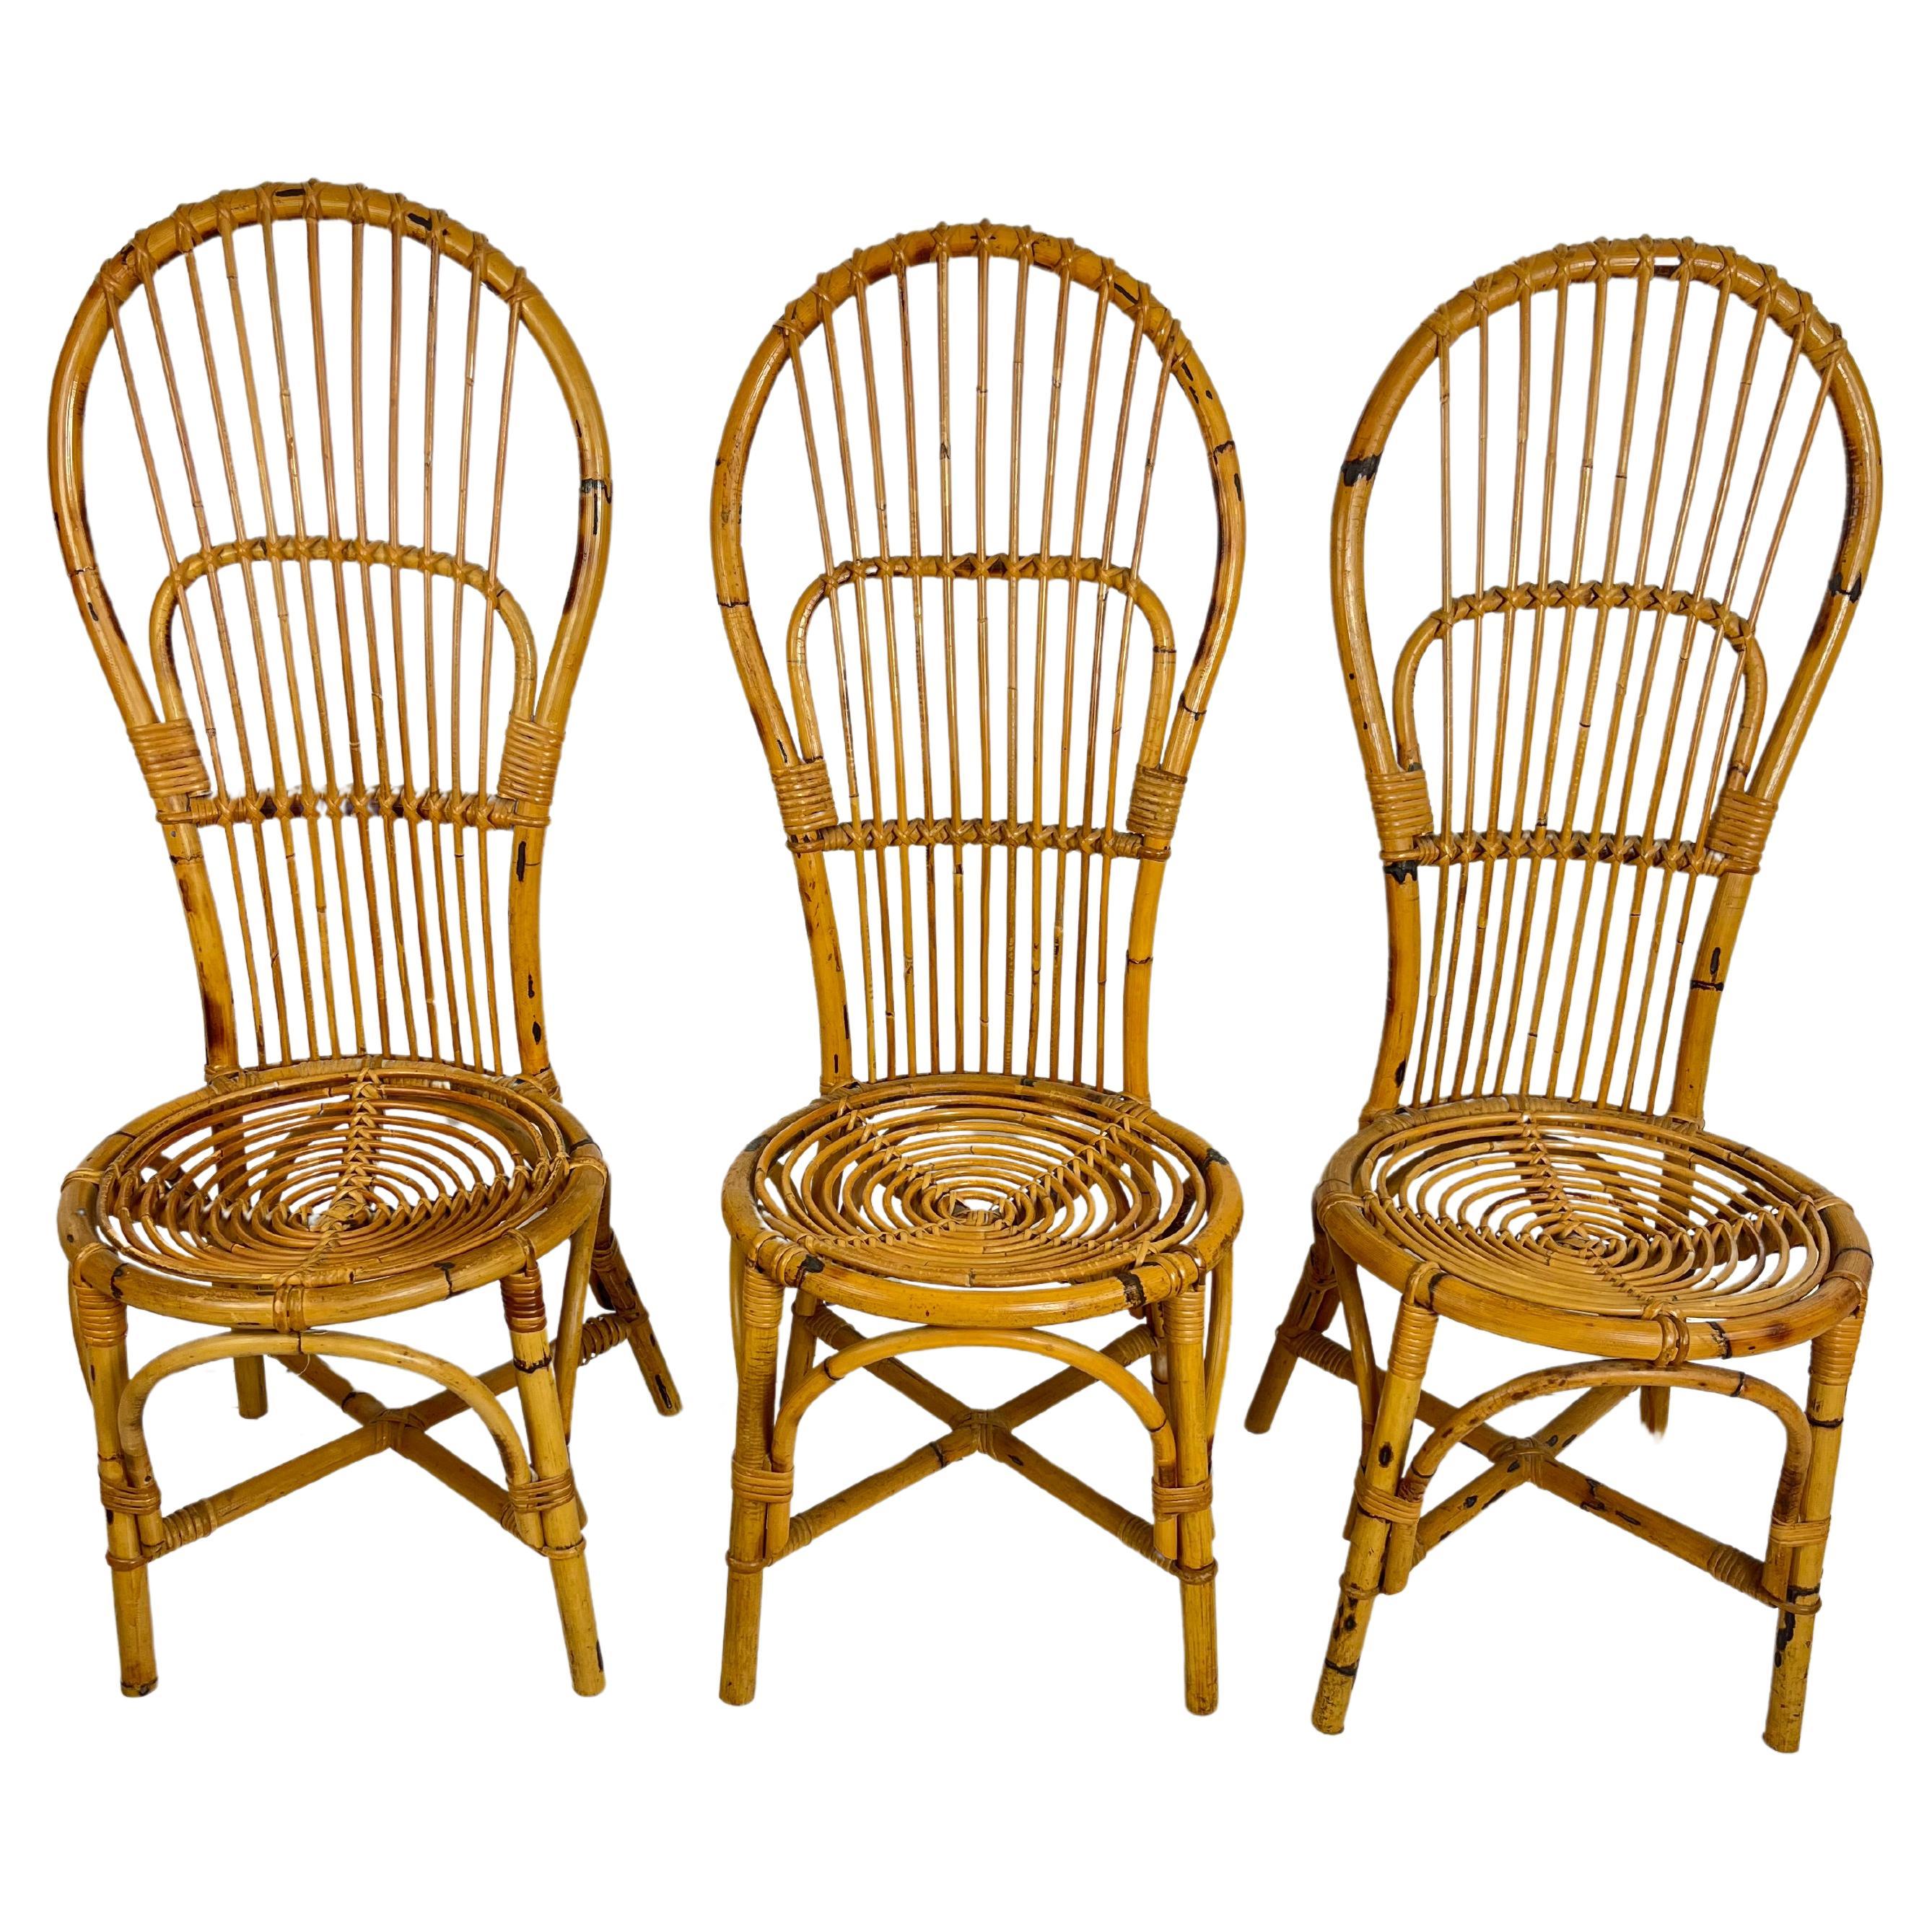 Set of 3 Mid-Century Bamboo  Chairs With Fan Backs Italian Design  1950s For Sale